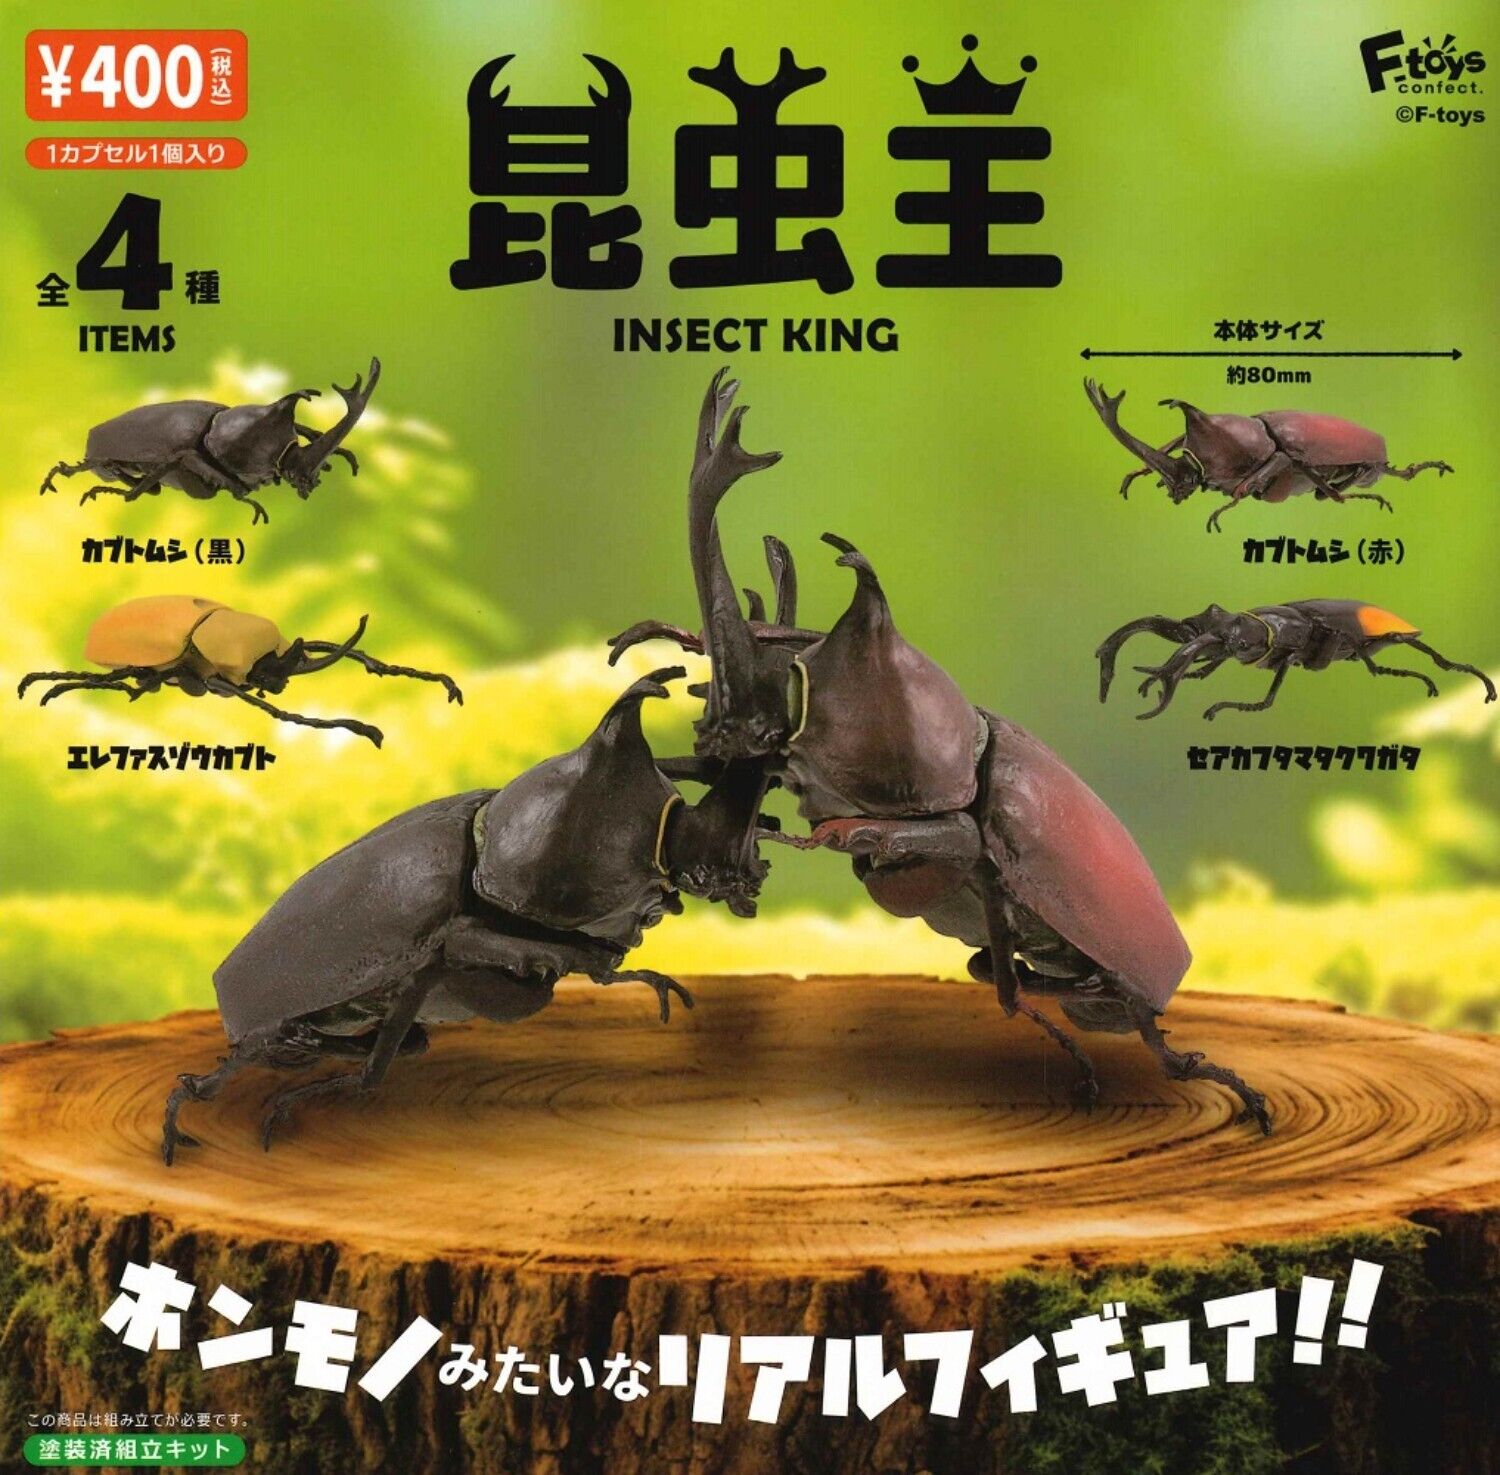 Insect King Mascot Capsule Toy 4 Types Full Comp Set Gacha New Japan